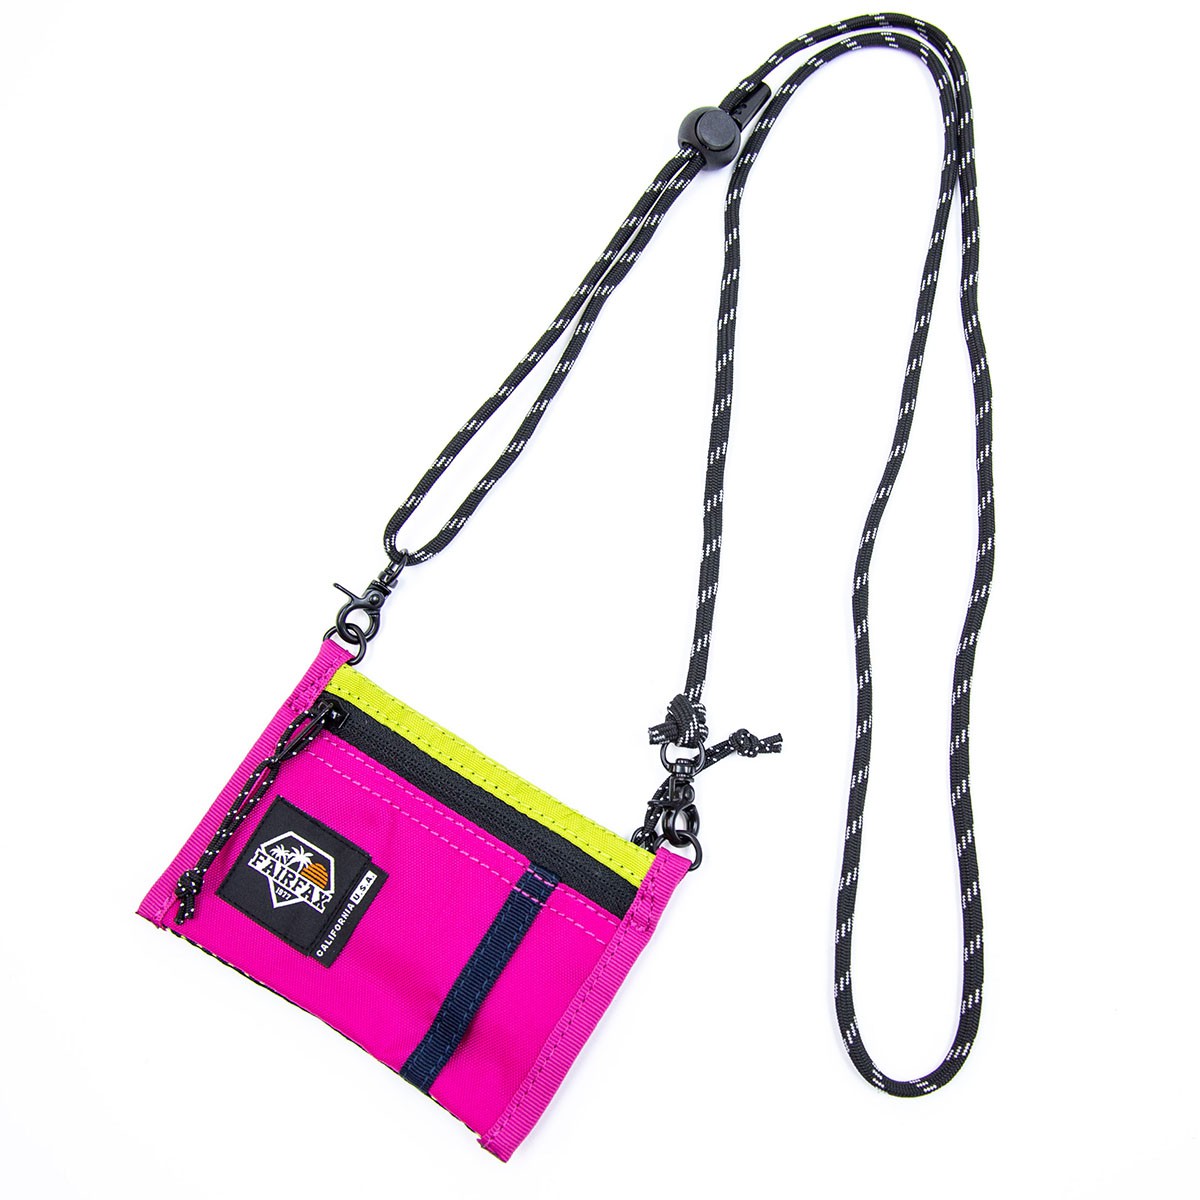 Fairfax Key Coin Pouch - FF0510 散銀包配可拆式長繩 Pink * Lime